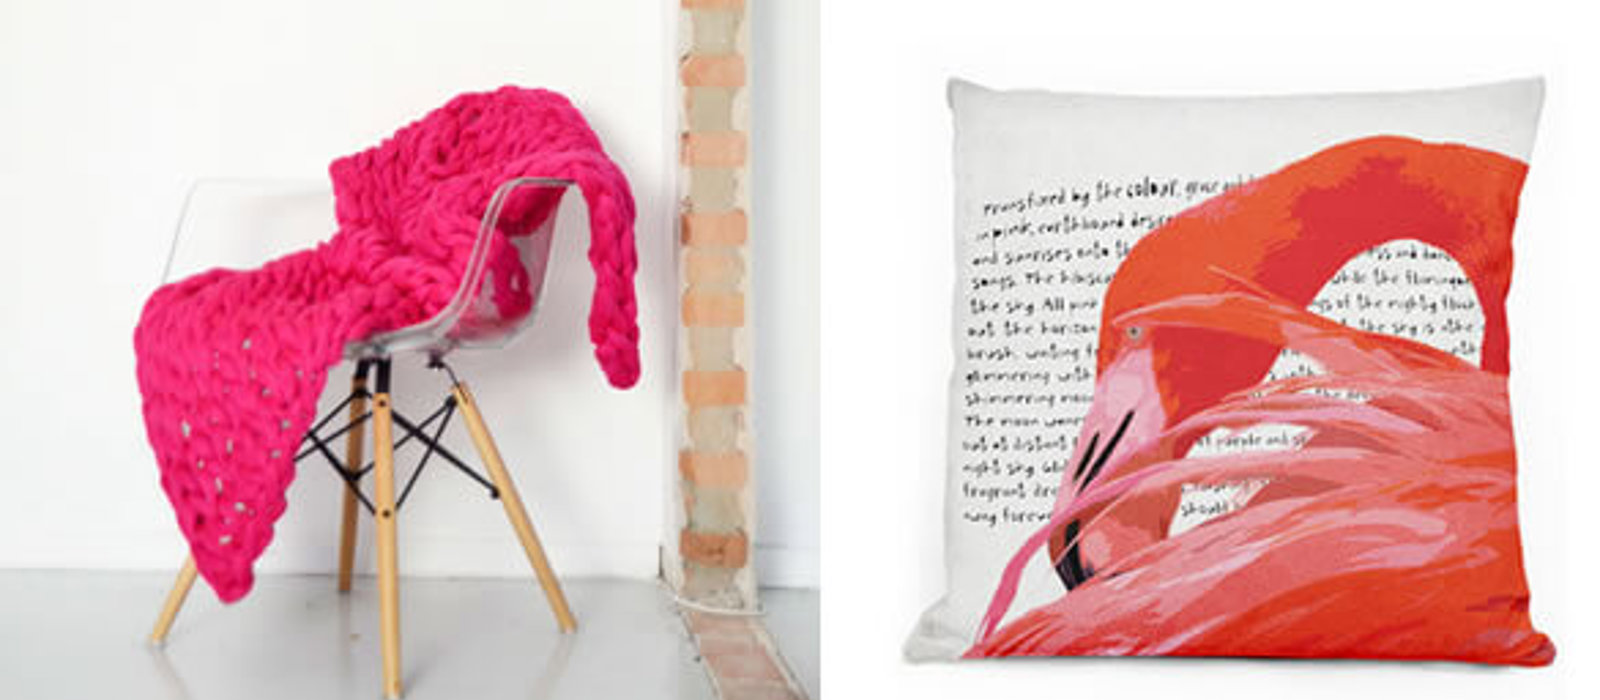 flamingo cushion and a pink blanket resting on a chair